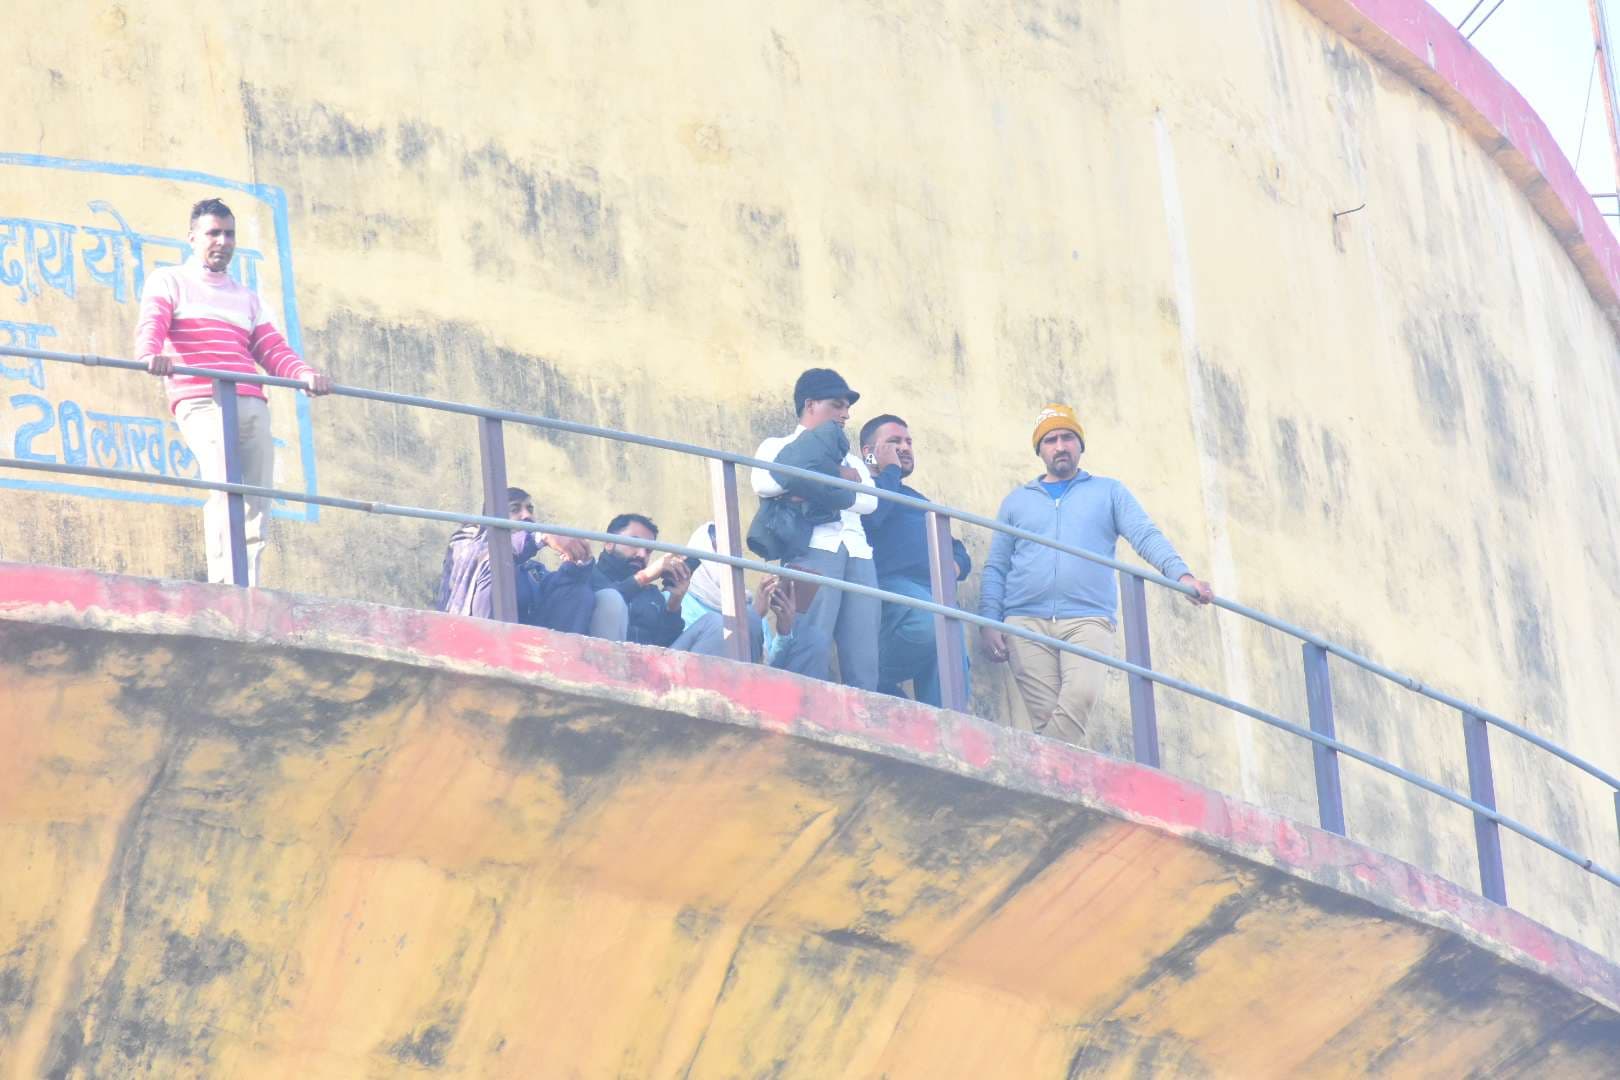 Case of fraud worth crores: Victims climbed on water tank